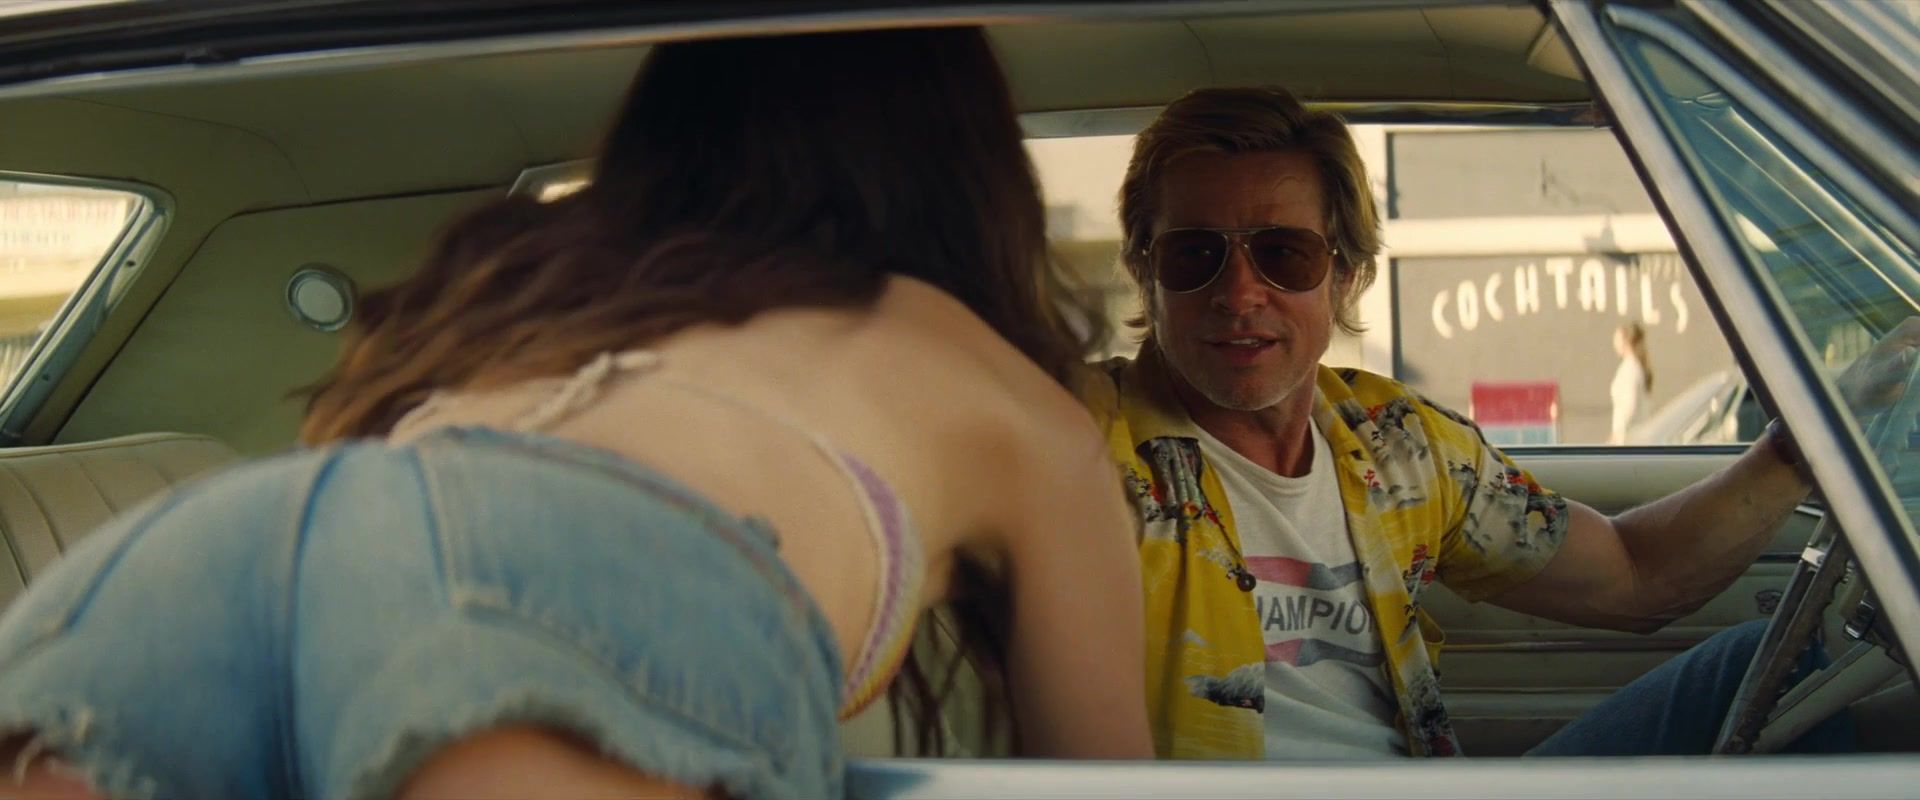 Real Sexy Dakota Fanning, Margaret Qualley naked- Once Upon A Time In Hollywood (2019) Pussyeating - 2